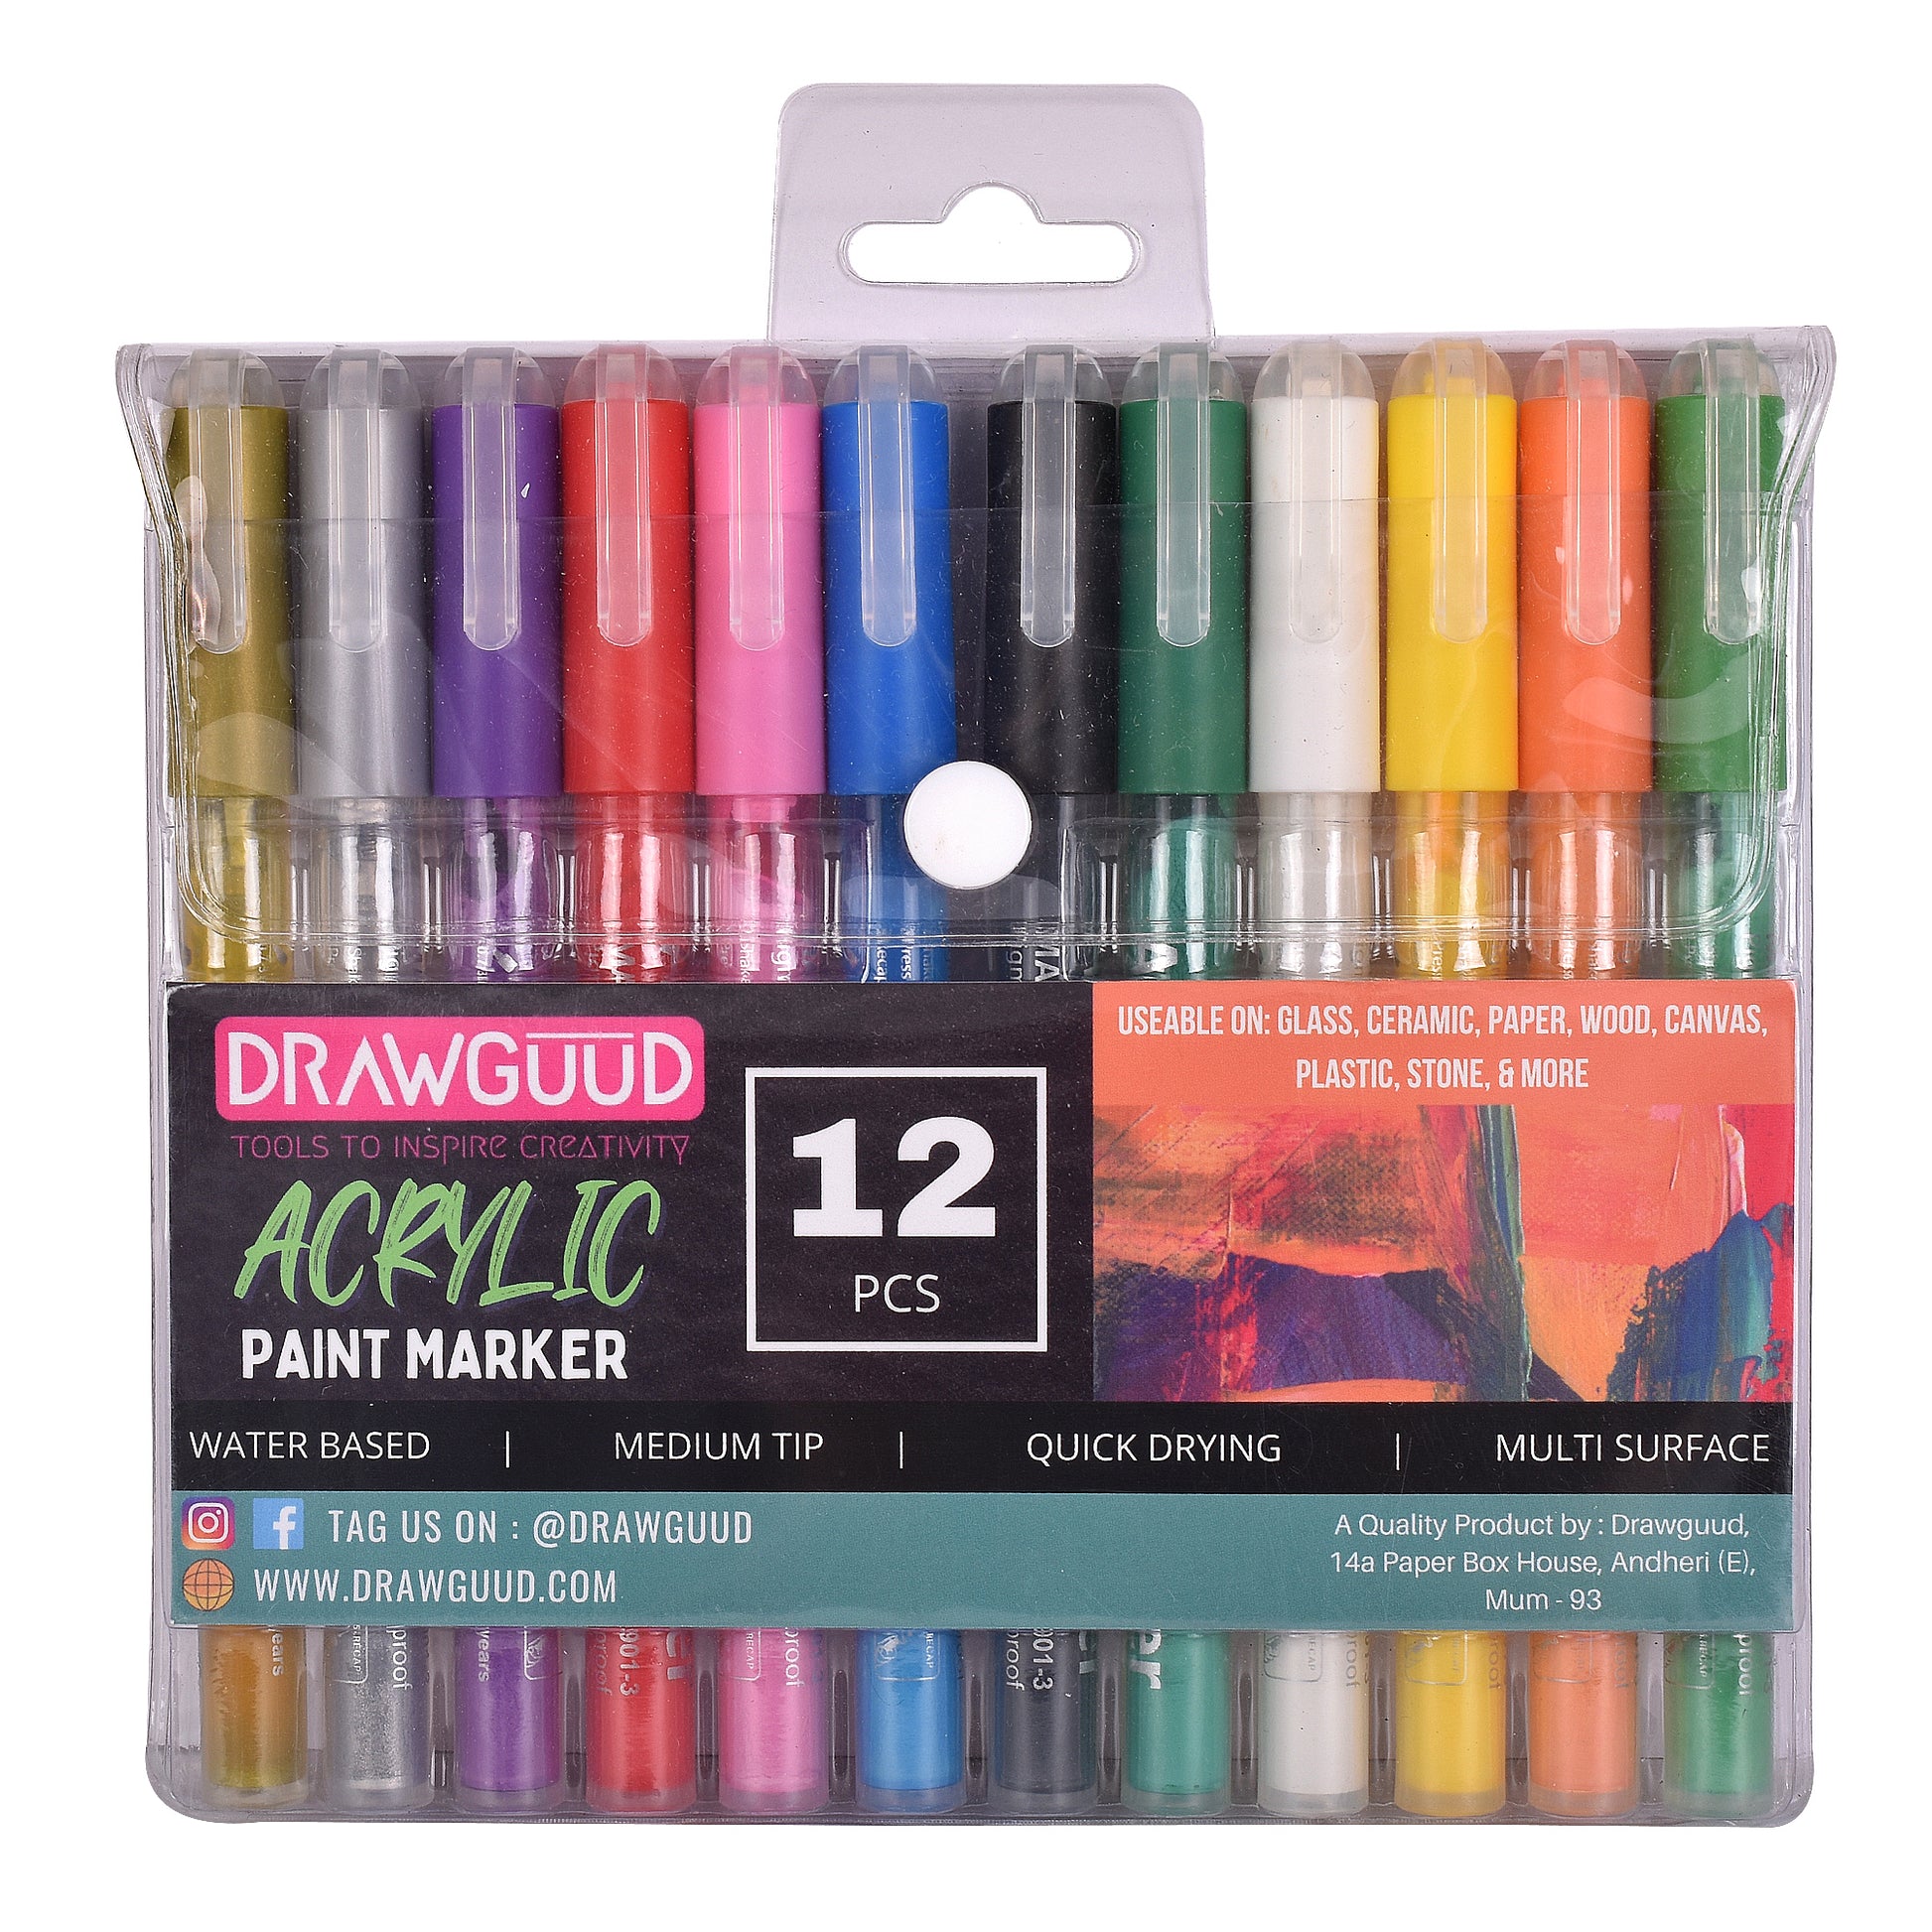  Artouch Acrylic Paint Pens - 24 PCS Triple Tips Acrylic Paint  Markers with Fine, Medium, Chisel Tips Ideal for Rock Painting, Ceramic,  Brush Lettering, Card Making, and DIY Crafts on Diverse